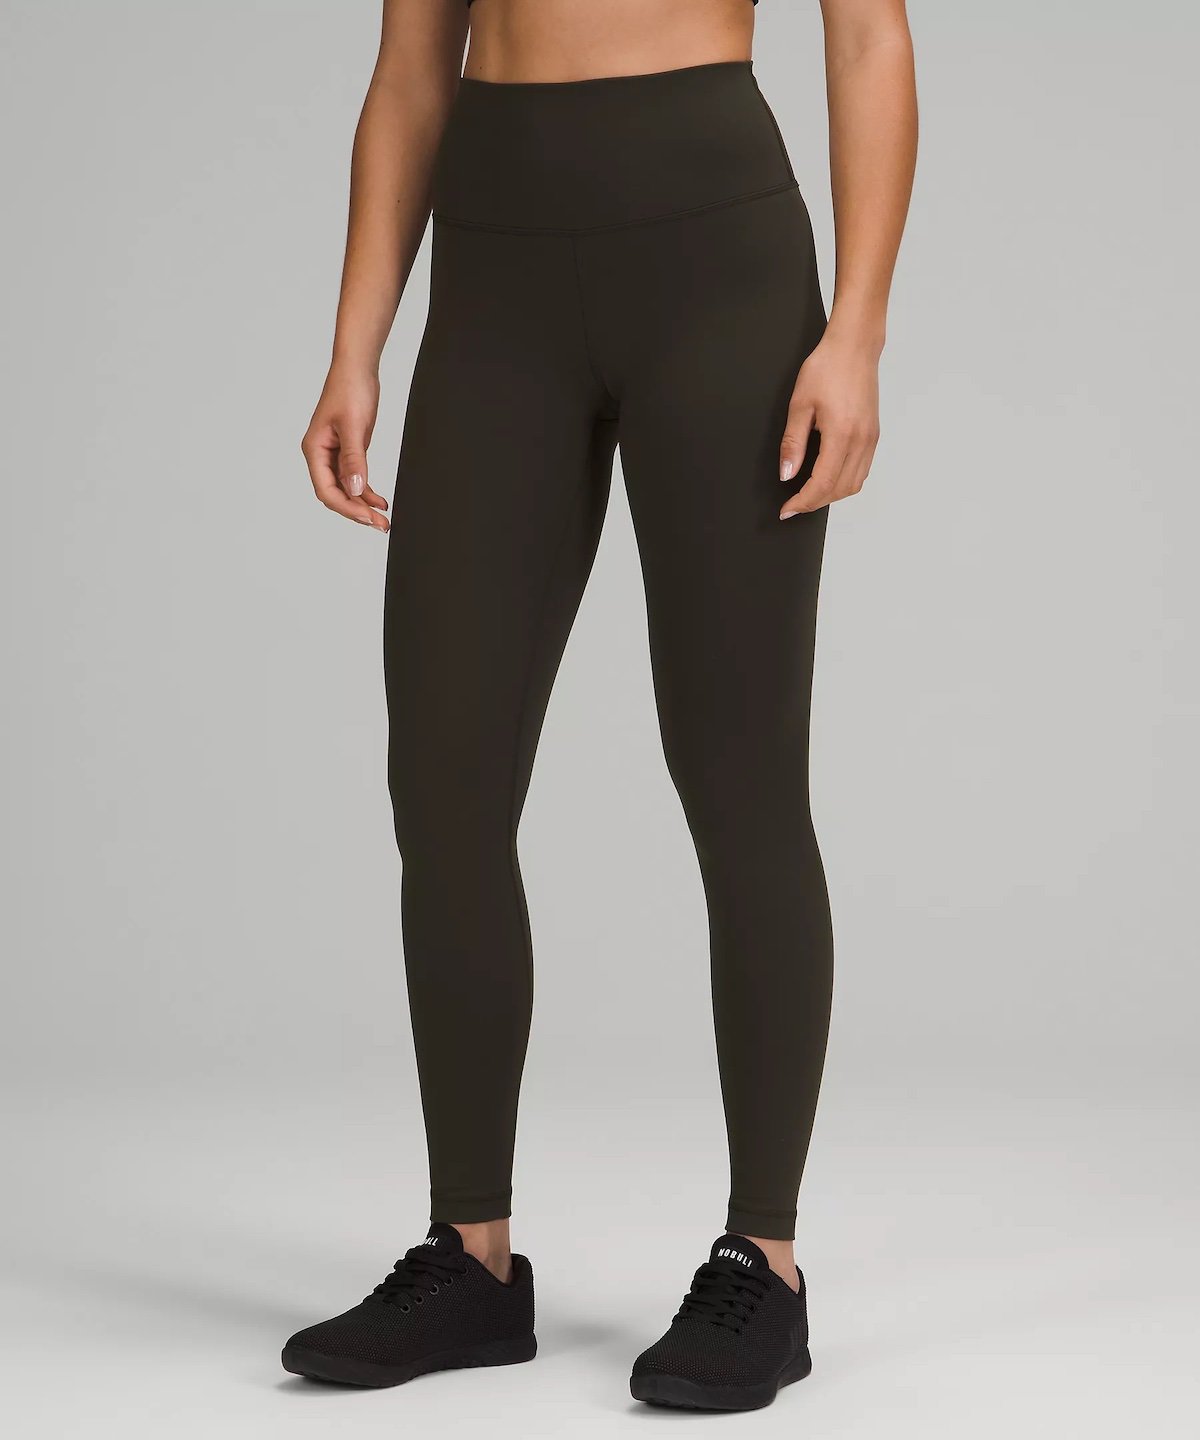 Lululemon Leggings Why are they so